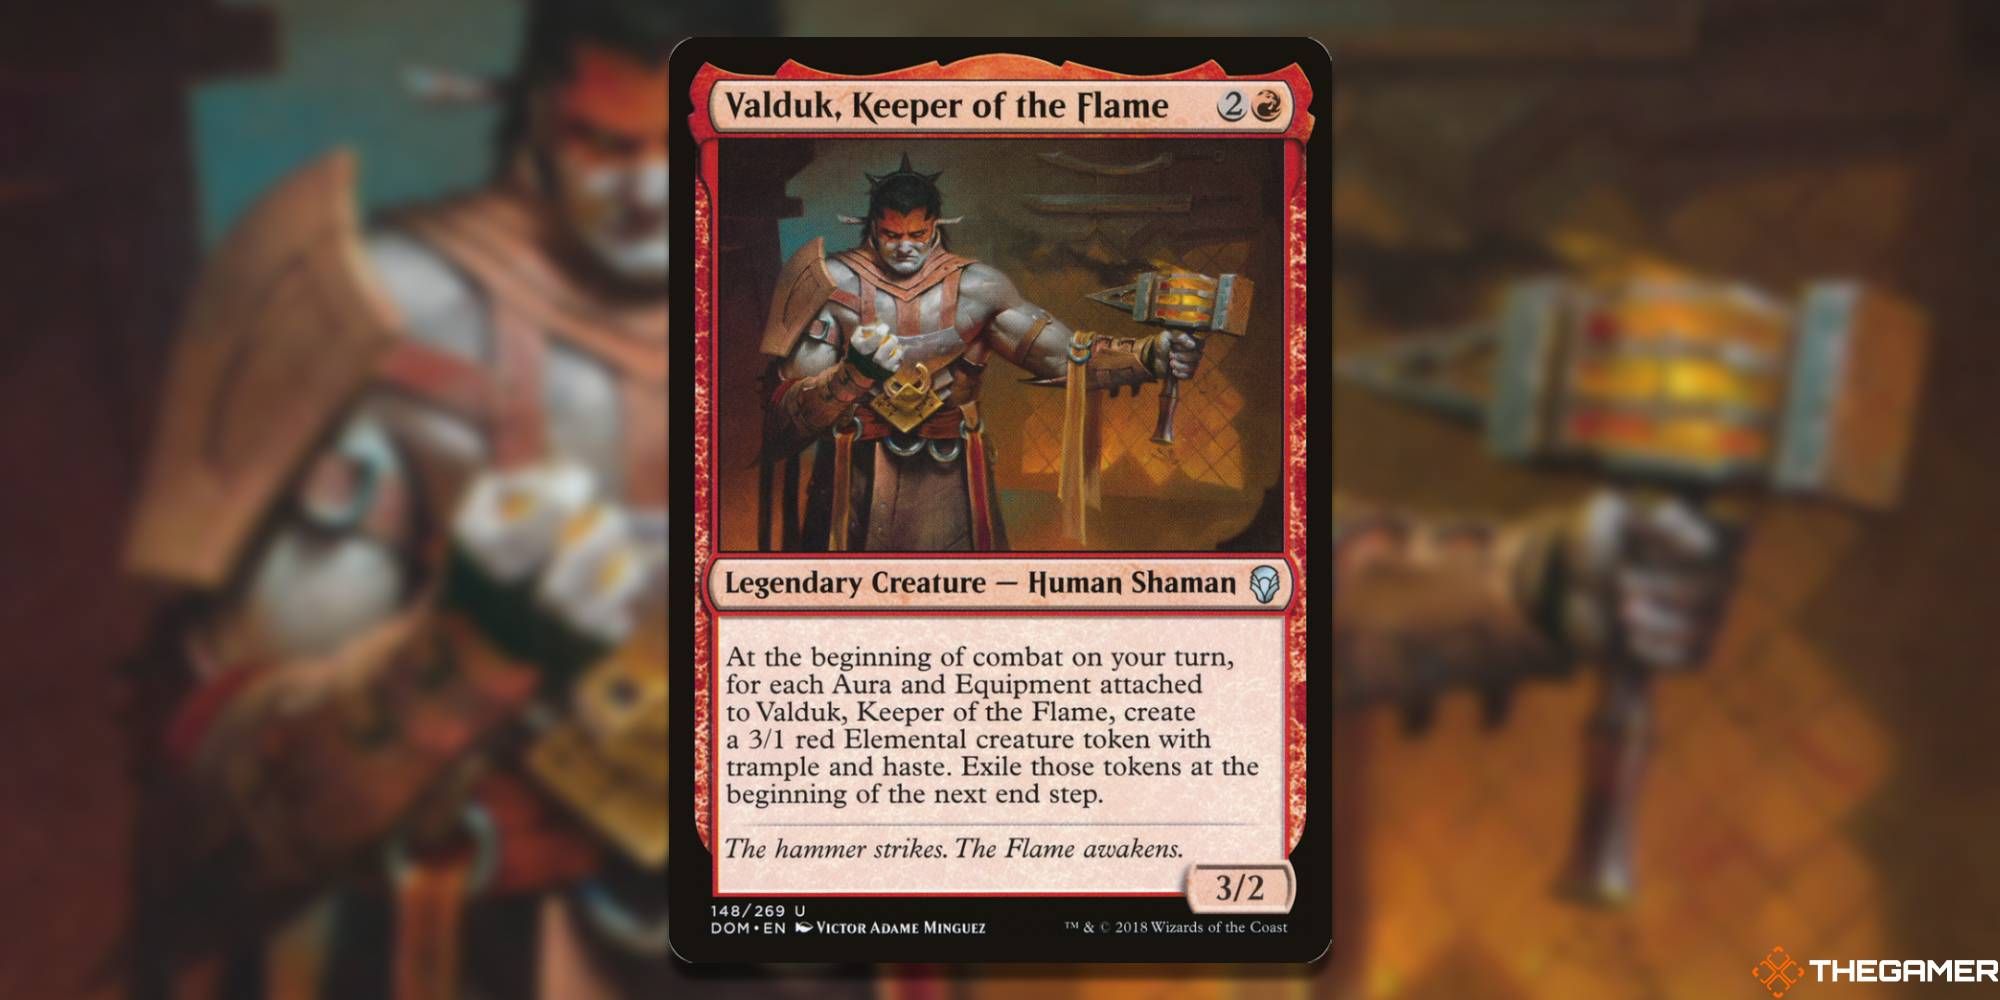 Image of the Valduk, Keeper of the Flame card in Magic: The Gathering, with art by Victor Adame Minguez